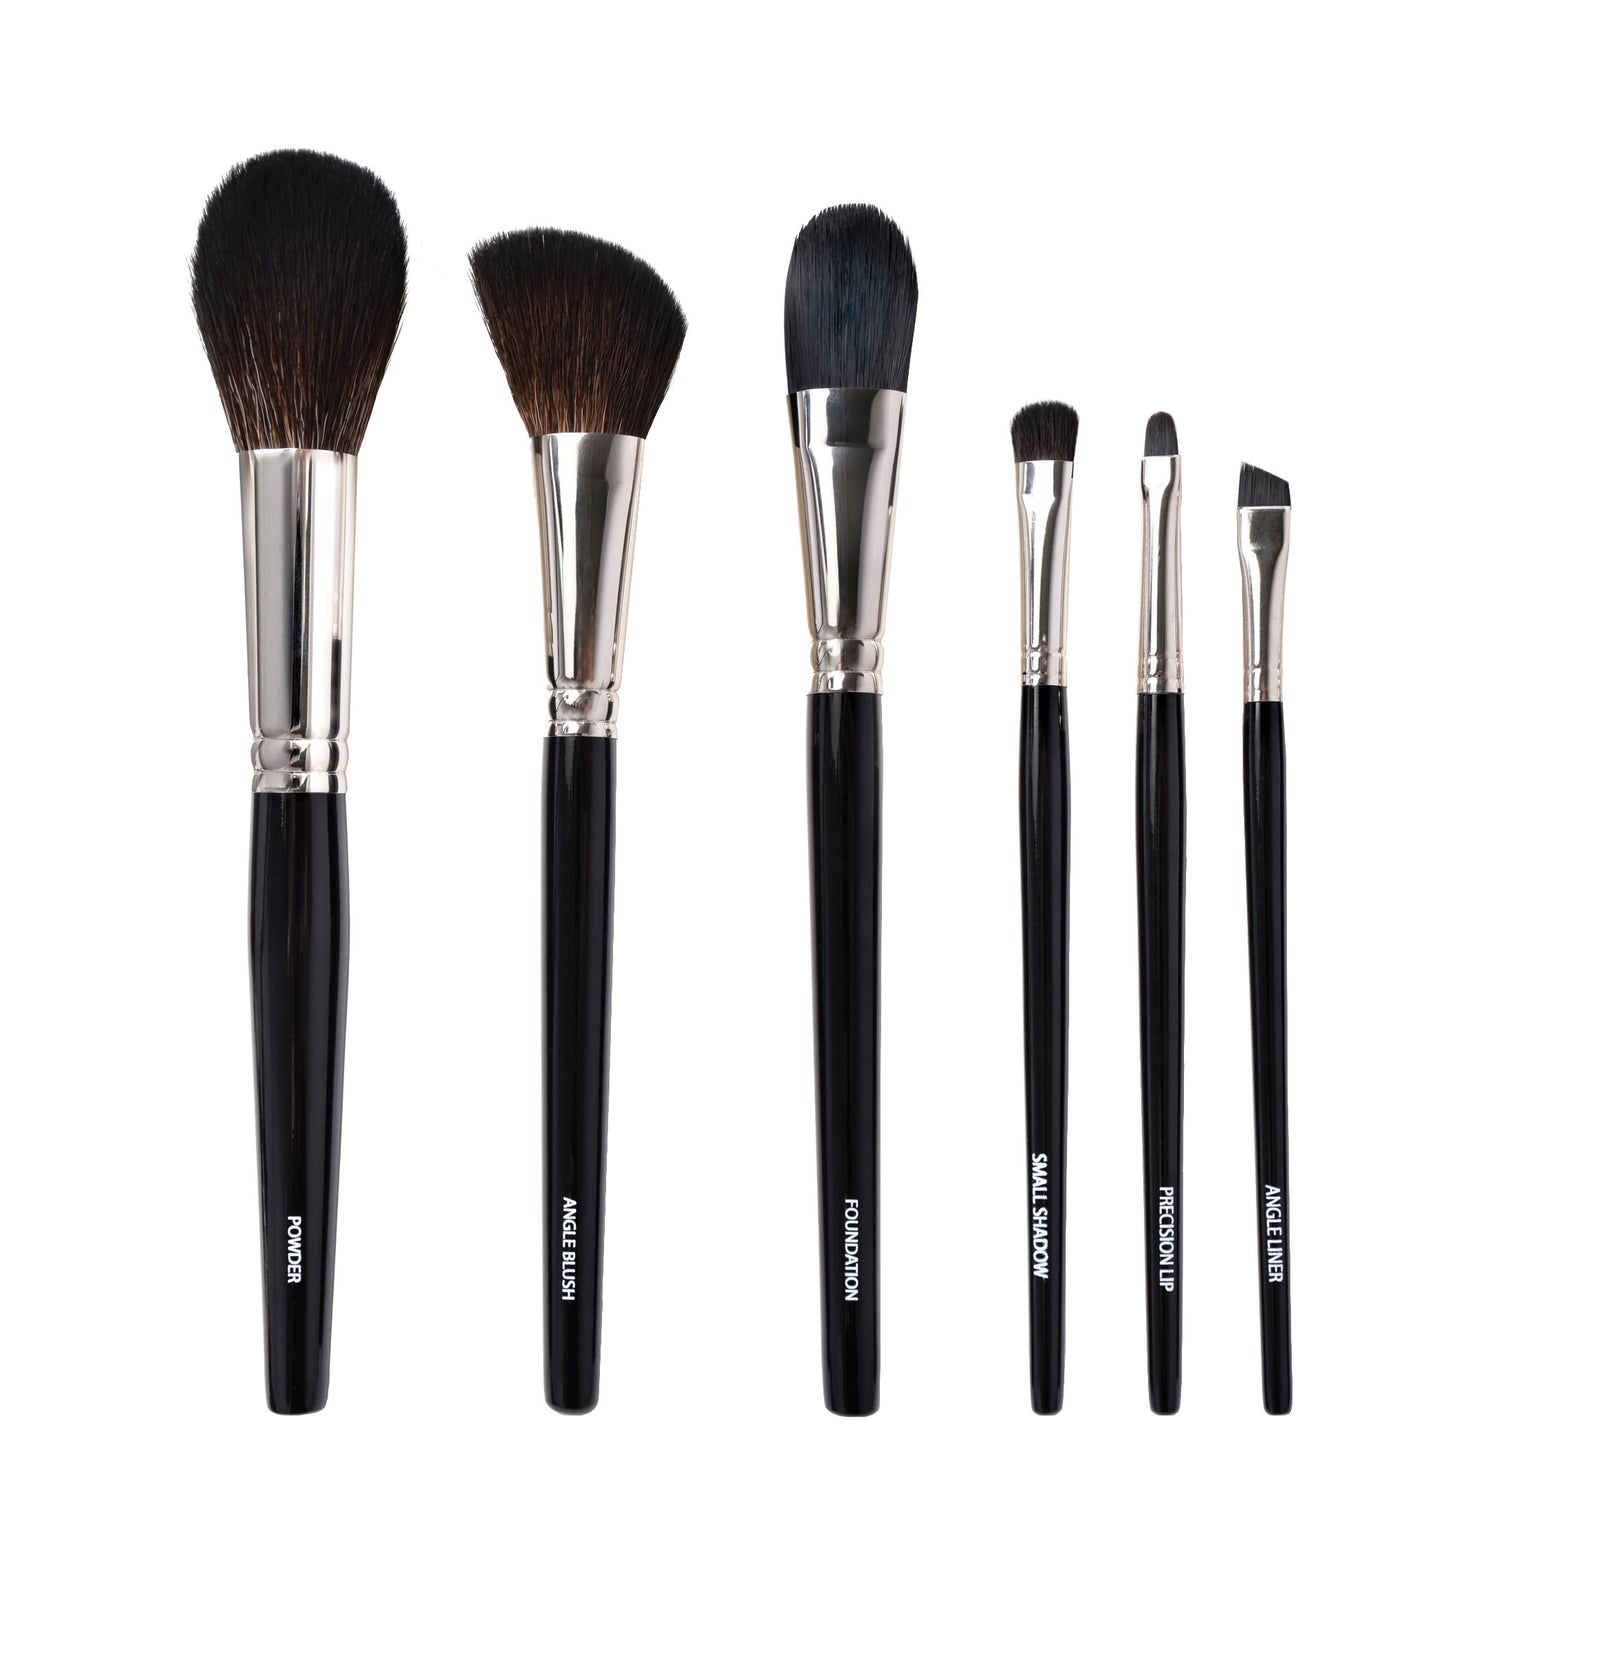 Alcone Company Professional Makeup Brushes, 6-Piece Set